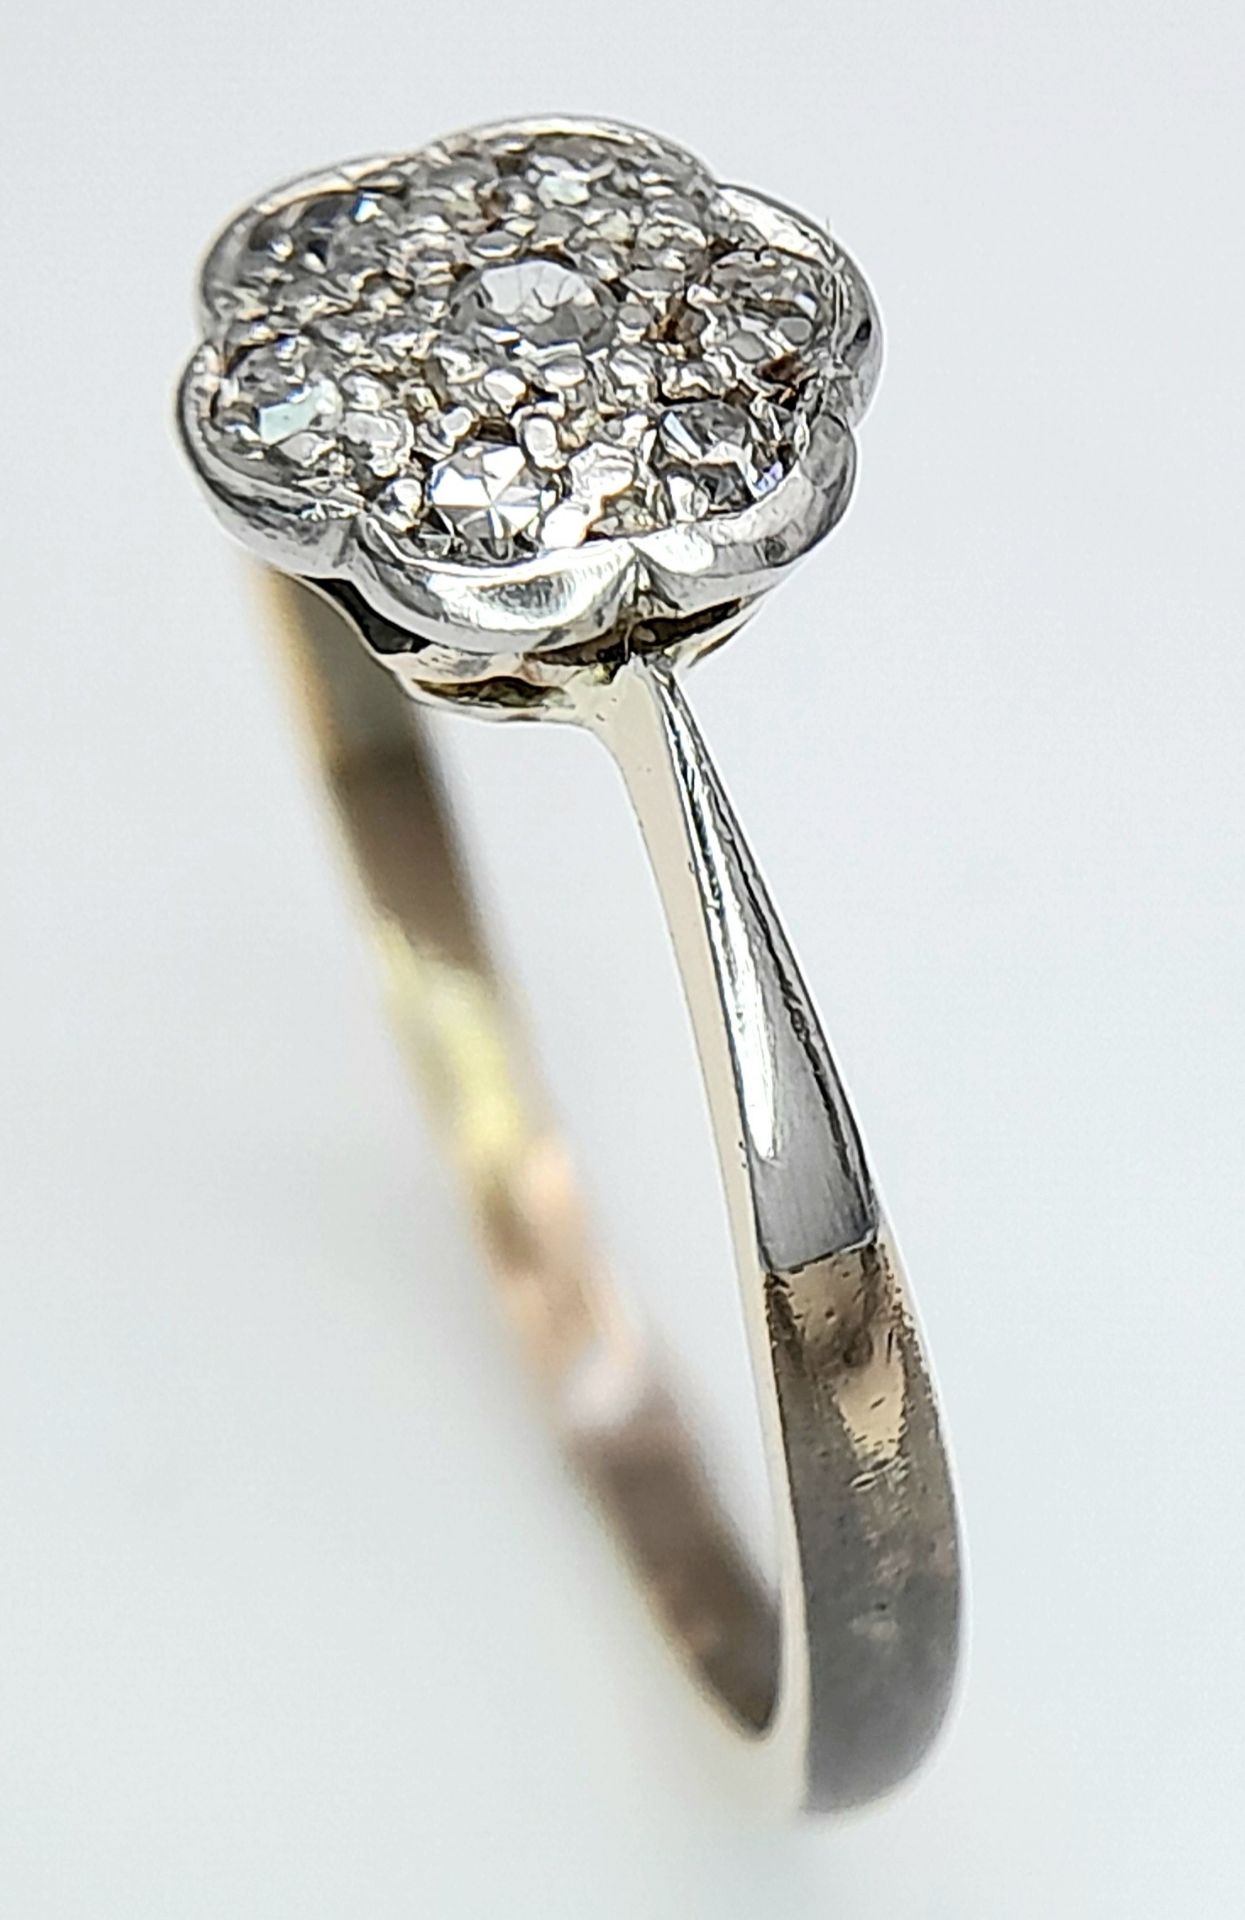 AN 18K YELLOW GOLD & PLATINUM VINTAGE DIAMOND CLUSTER RING. Size R, 3.1g total weight. Ref: SC 8065 - Image 5 of 7